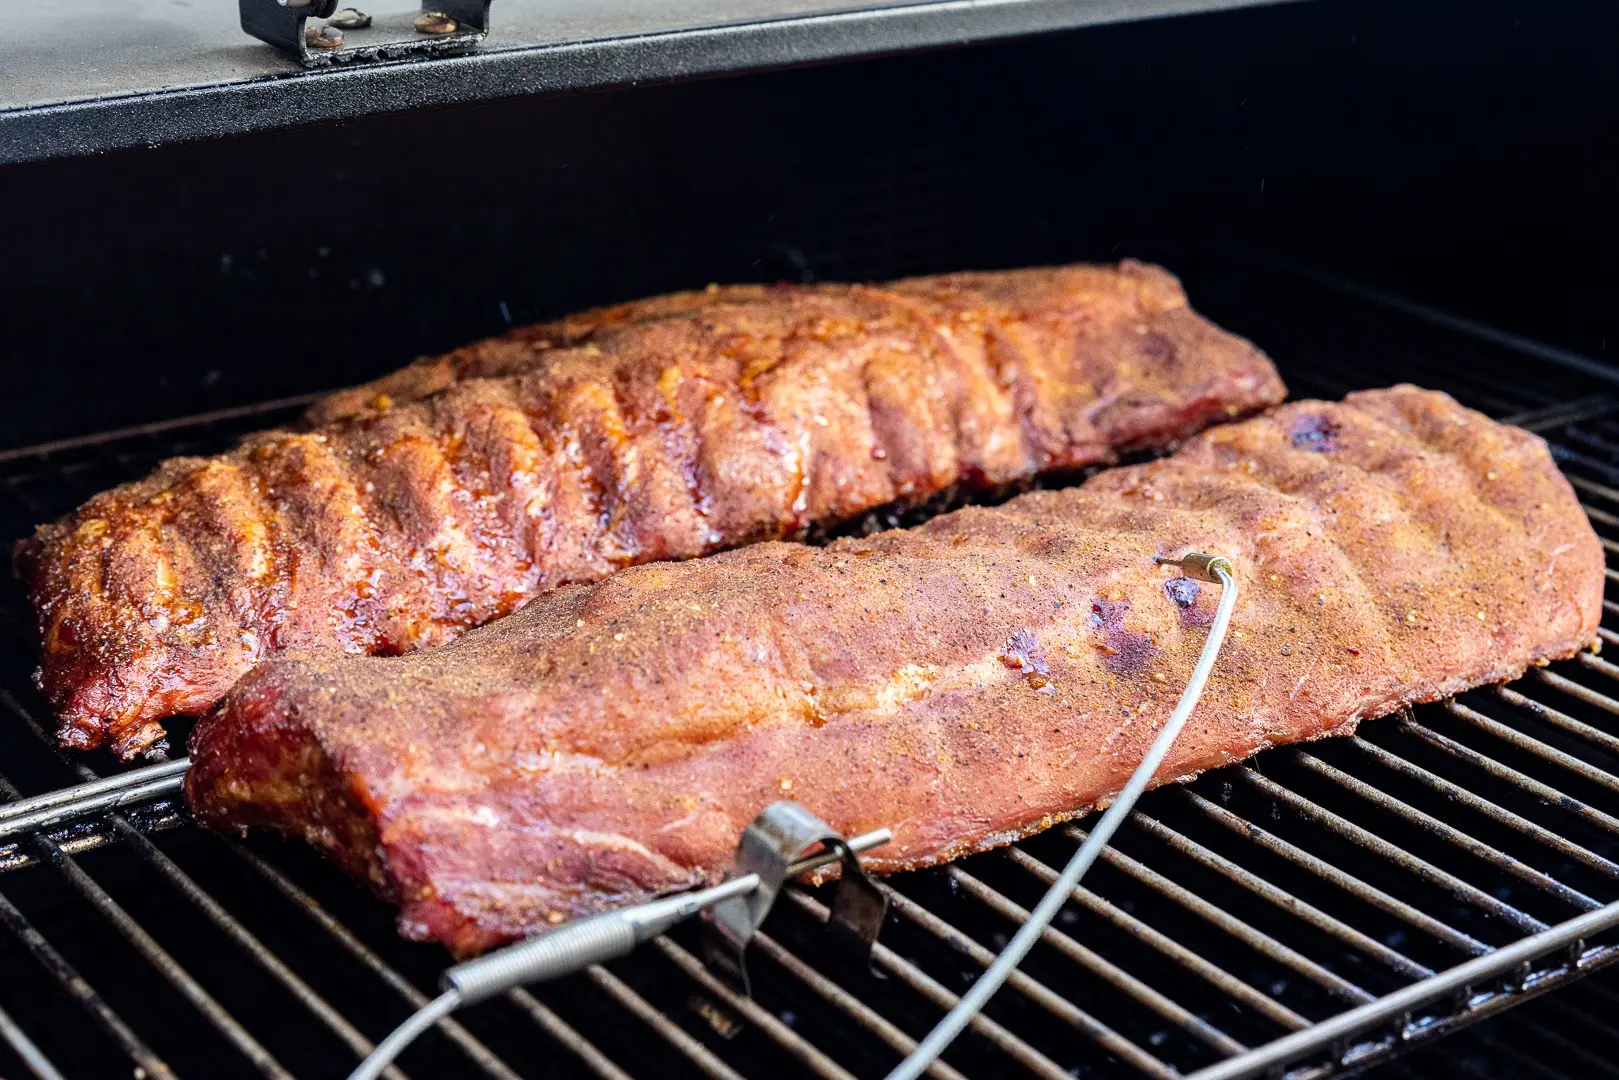 smoked pork spare ribs temperature - What temperature is smoked spare ribs done